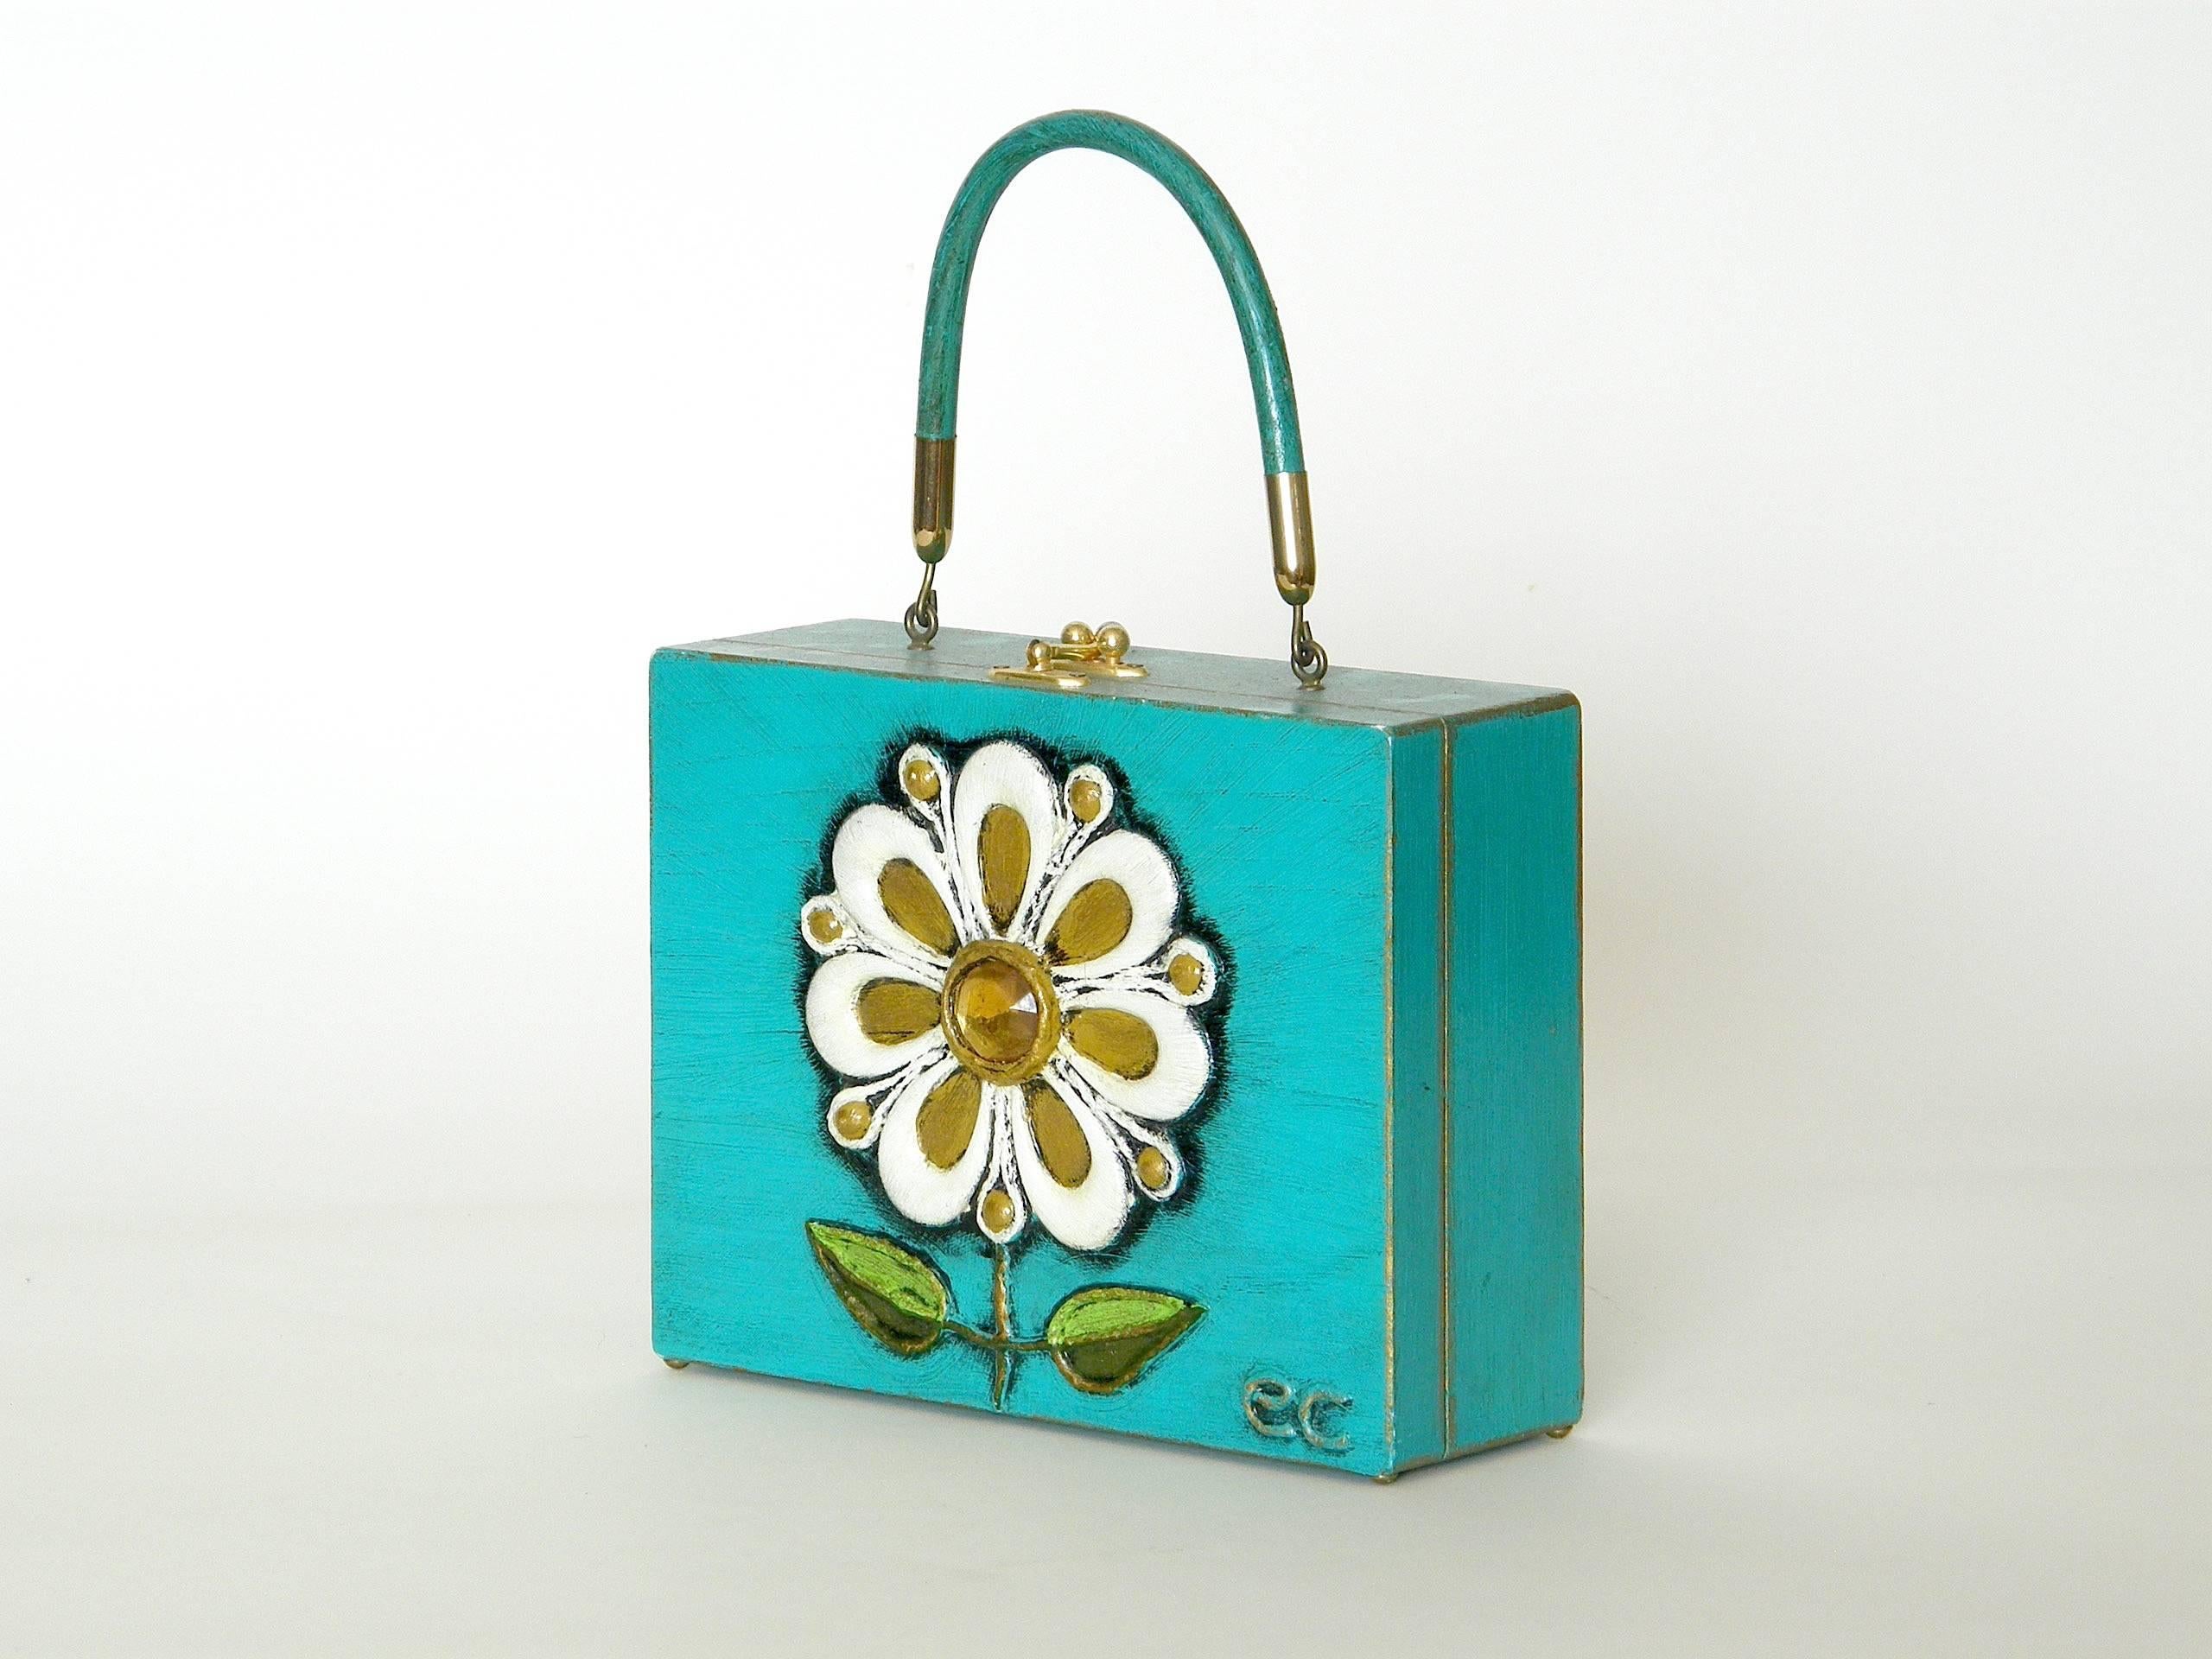 Cheerful, handmade papier mache box bag with jeweled flower by Enid Collins. It rests on little brass button feet.

The height given below is the overall height including the handle. The height of the box part only is 6.75